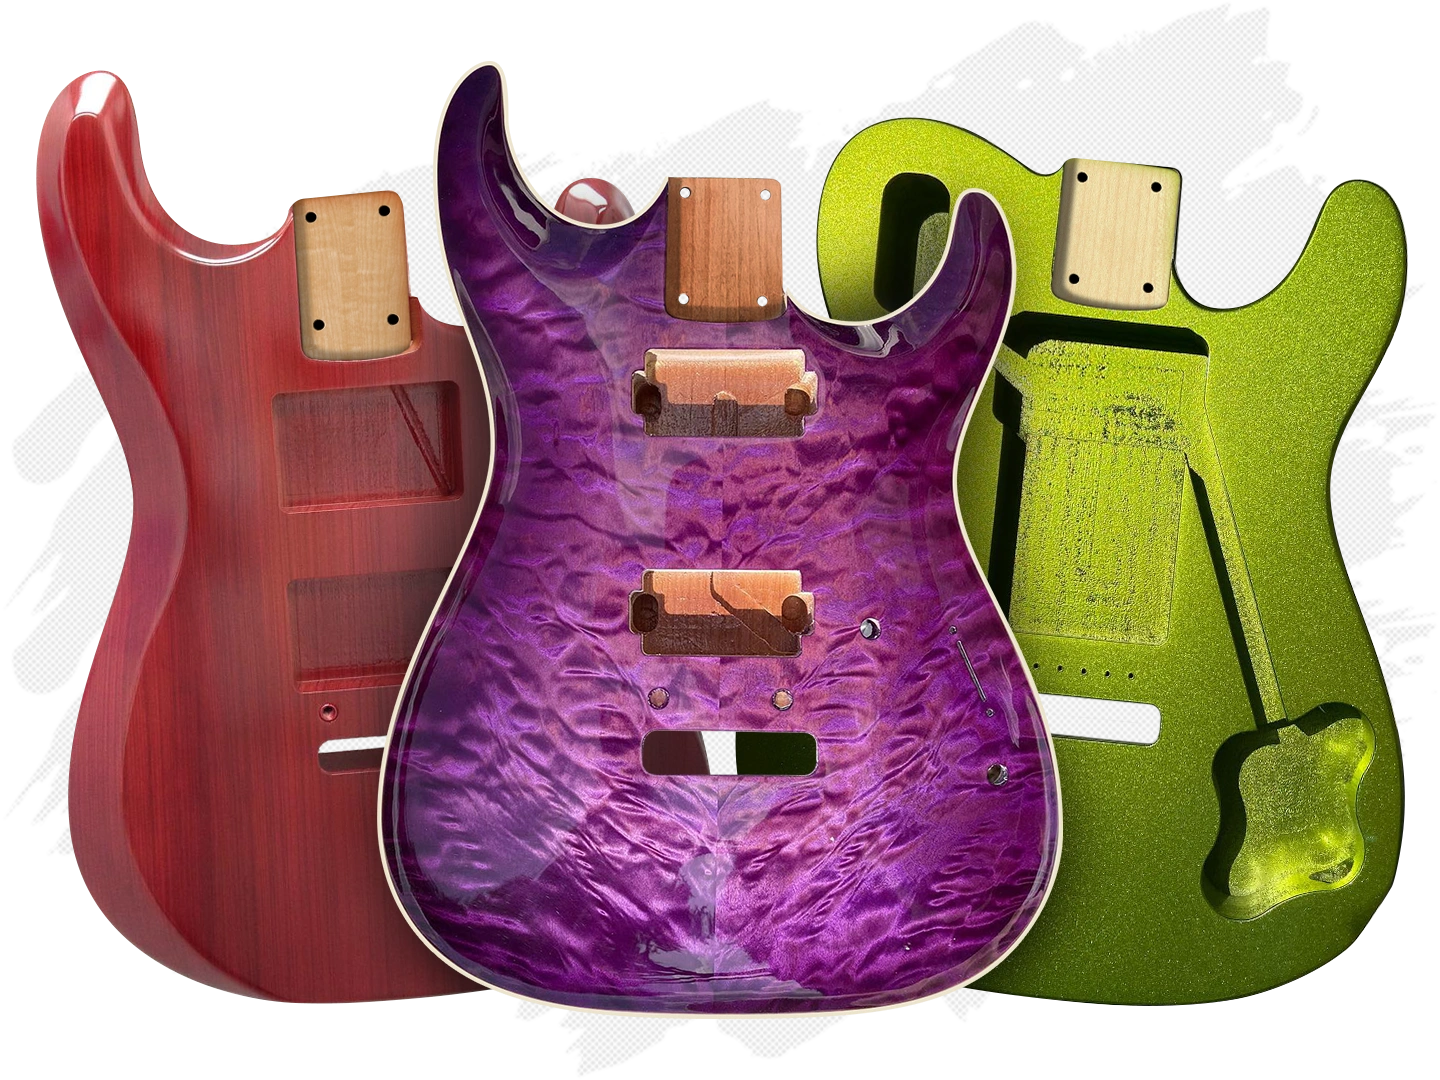 Three guitars, red, purple, and green, finished in nitrocellulose.